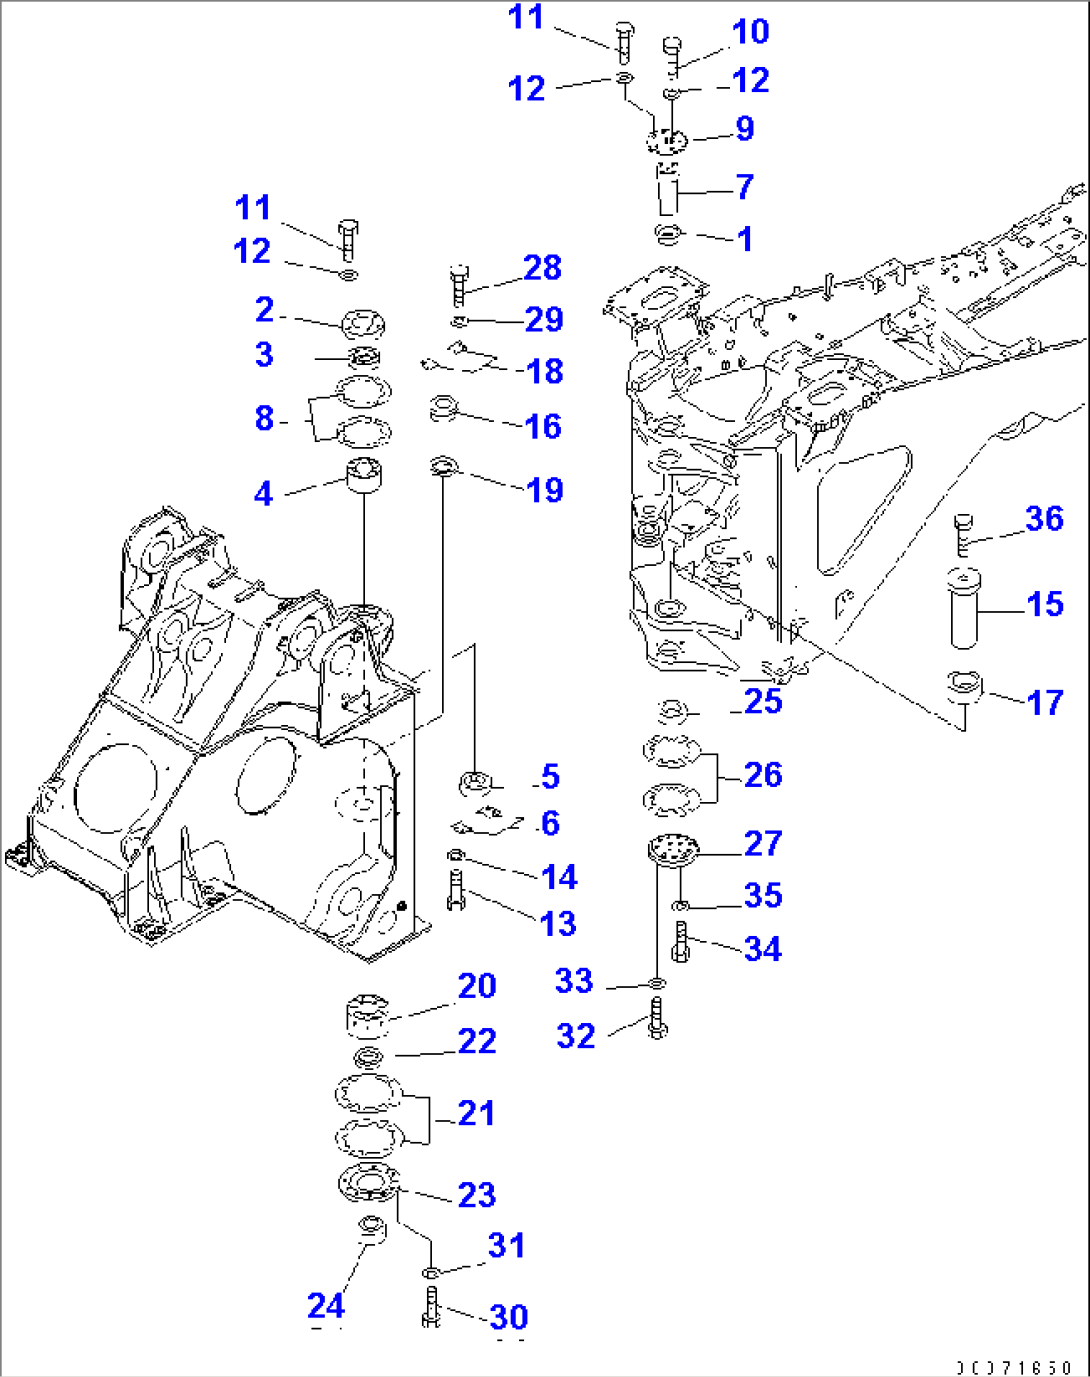 HINGE PIN (FOR FRONT AND REAR FRAME CONNECTING)(#50042-)